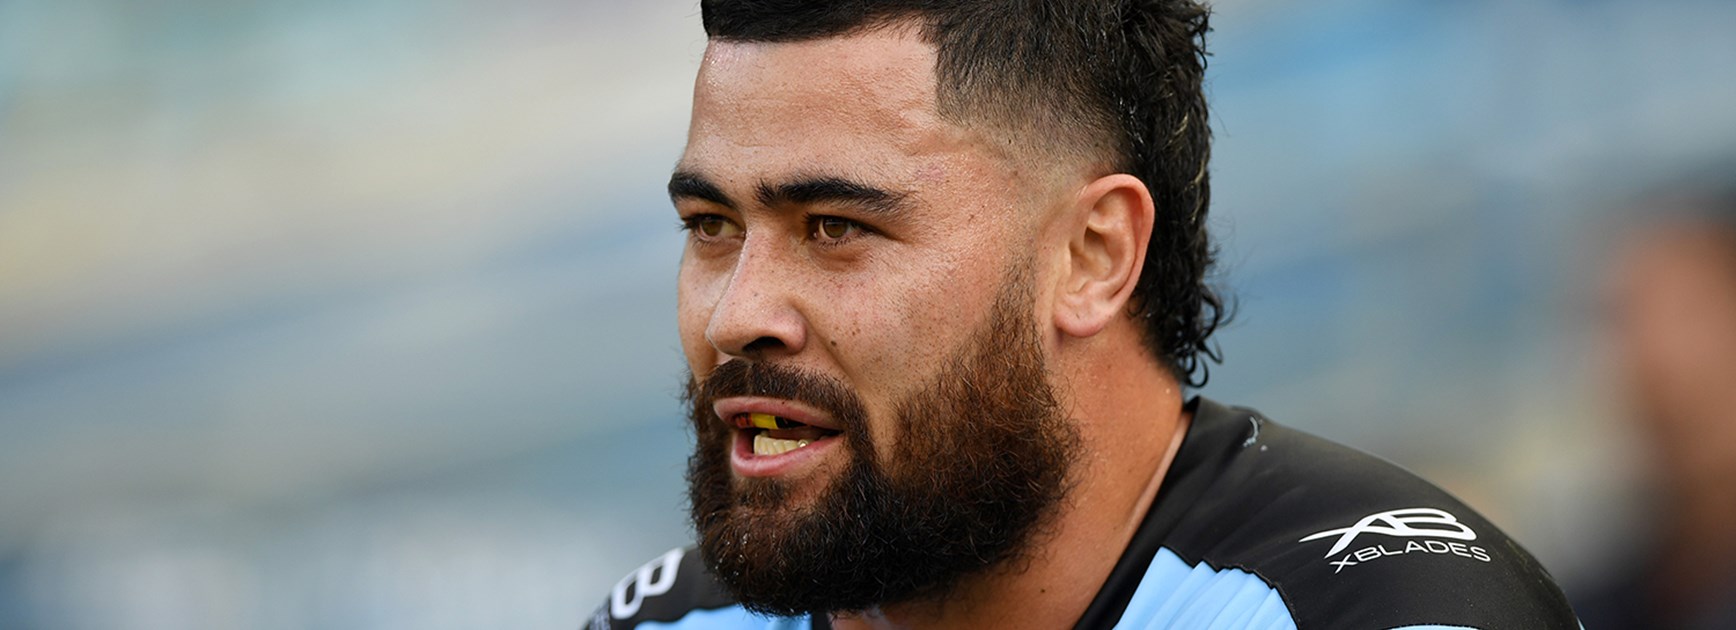 2018 Player Review - Andrew Fifita